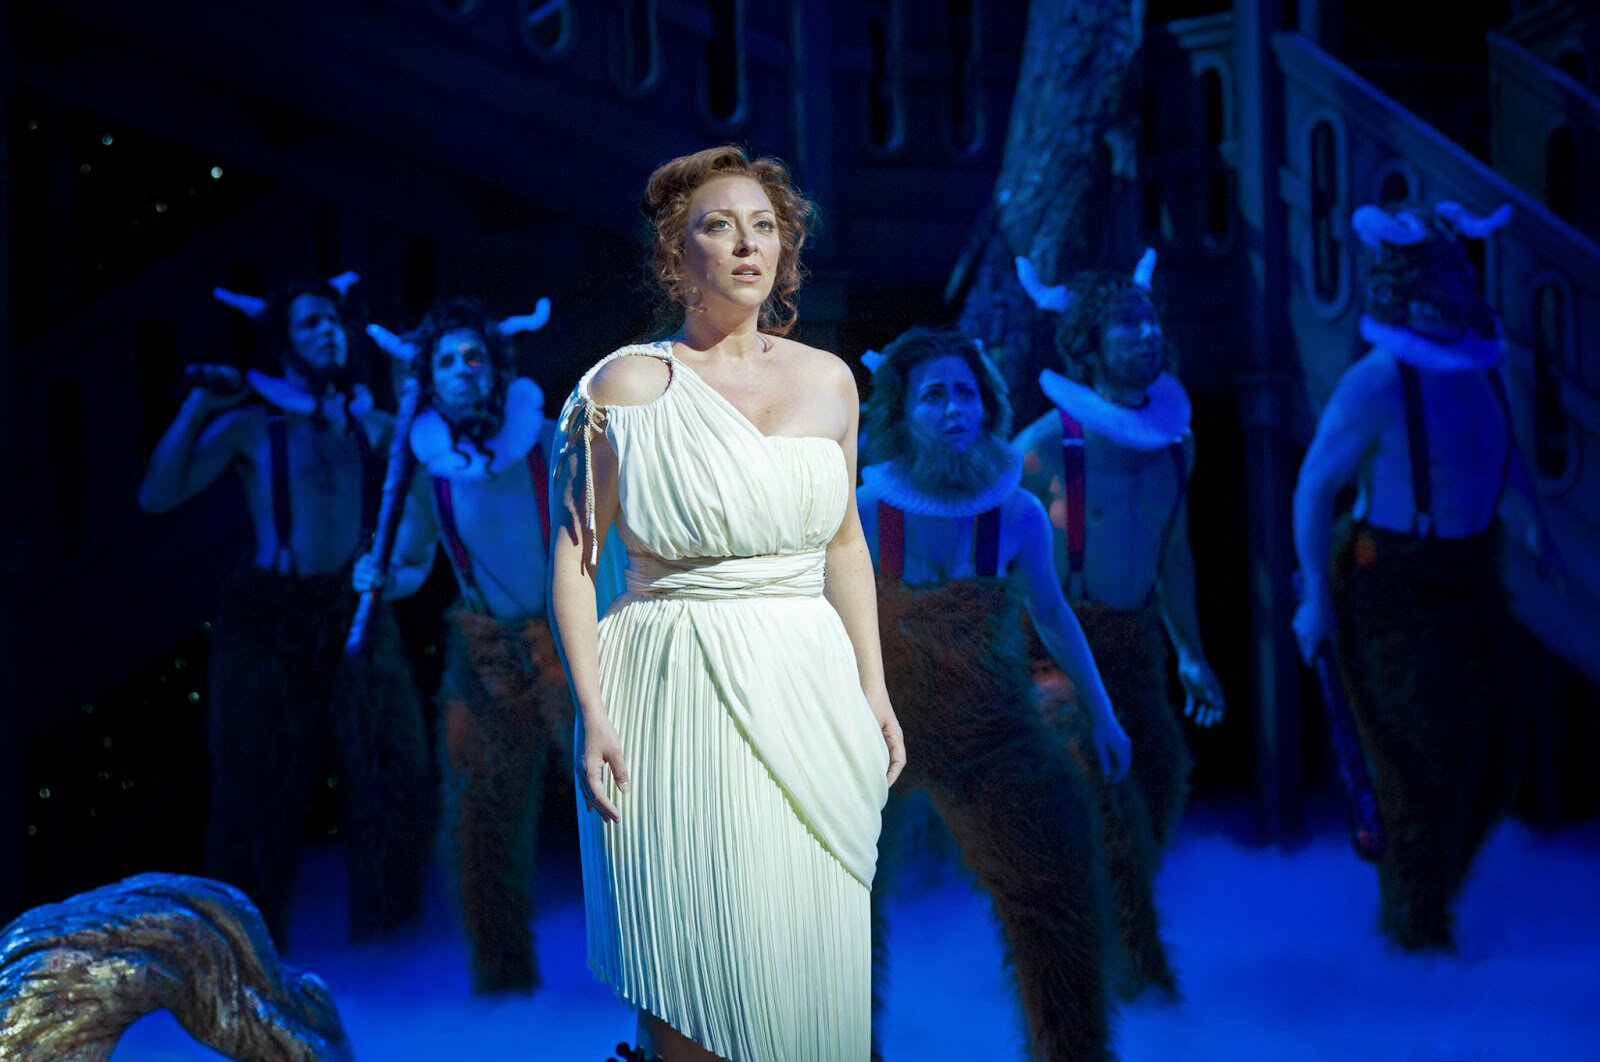  “In  Opera and the French Revolution  the three lead characters of Antigone, Sapho, and Médée were all stunningly performed by Canadian soprano, Nathalie Paulin. She epically sang her way from devoted daughter, to spurned lover, to murderous mother 